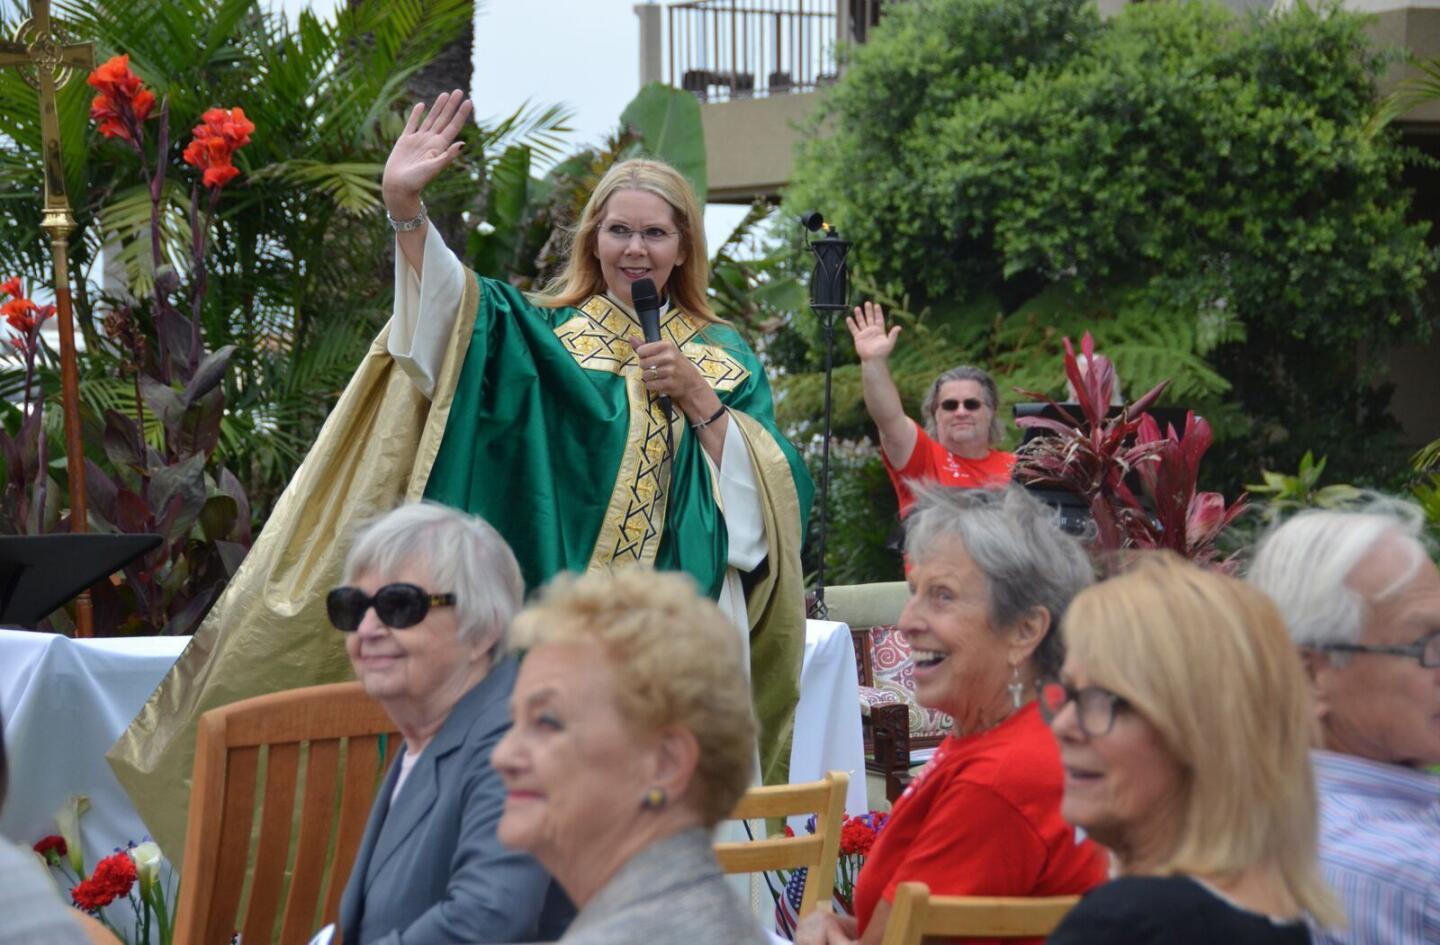 The Rev. Canon Cindy Evans Voorhees waves to a passing firetruck sounding its sirens during the outdoor service held Sunday.